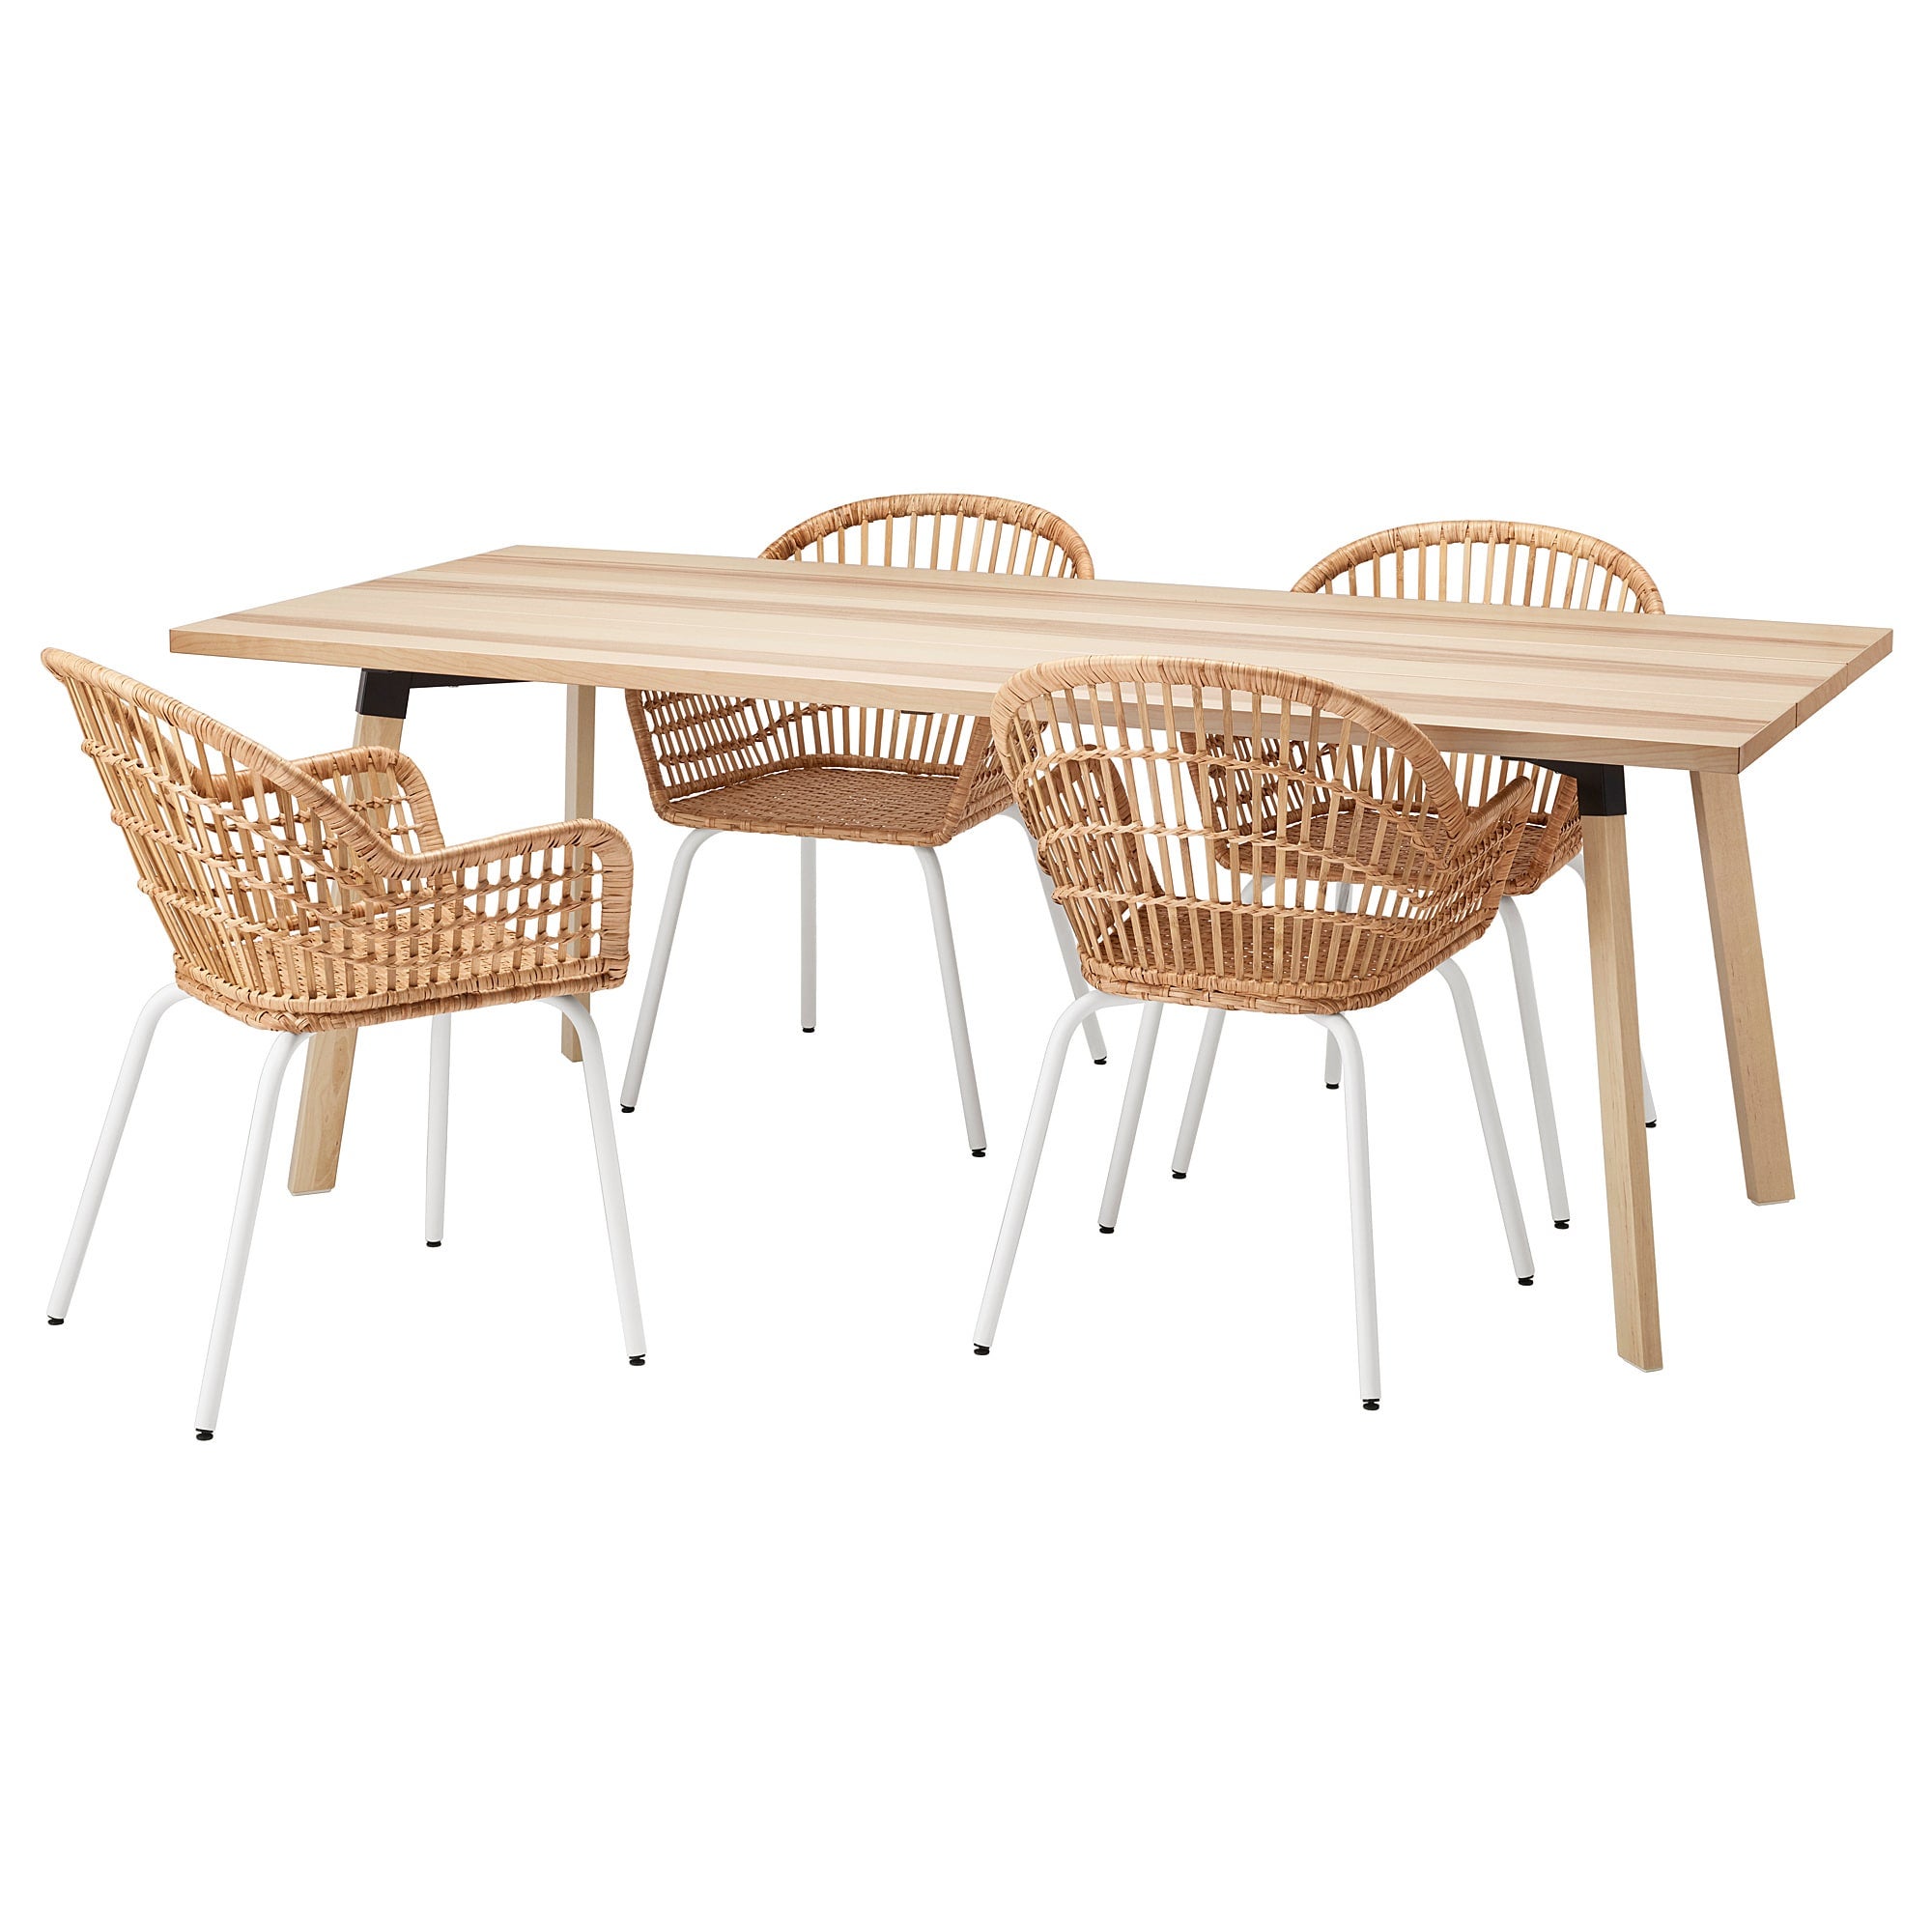 ypperlig-nilsove-table-and-4-chairs-ash-rattan-white__0720682_PE732748_S5